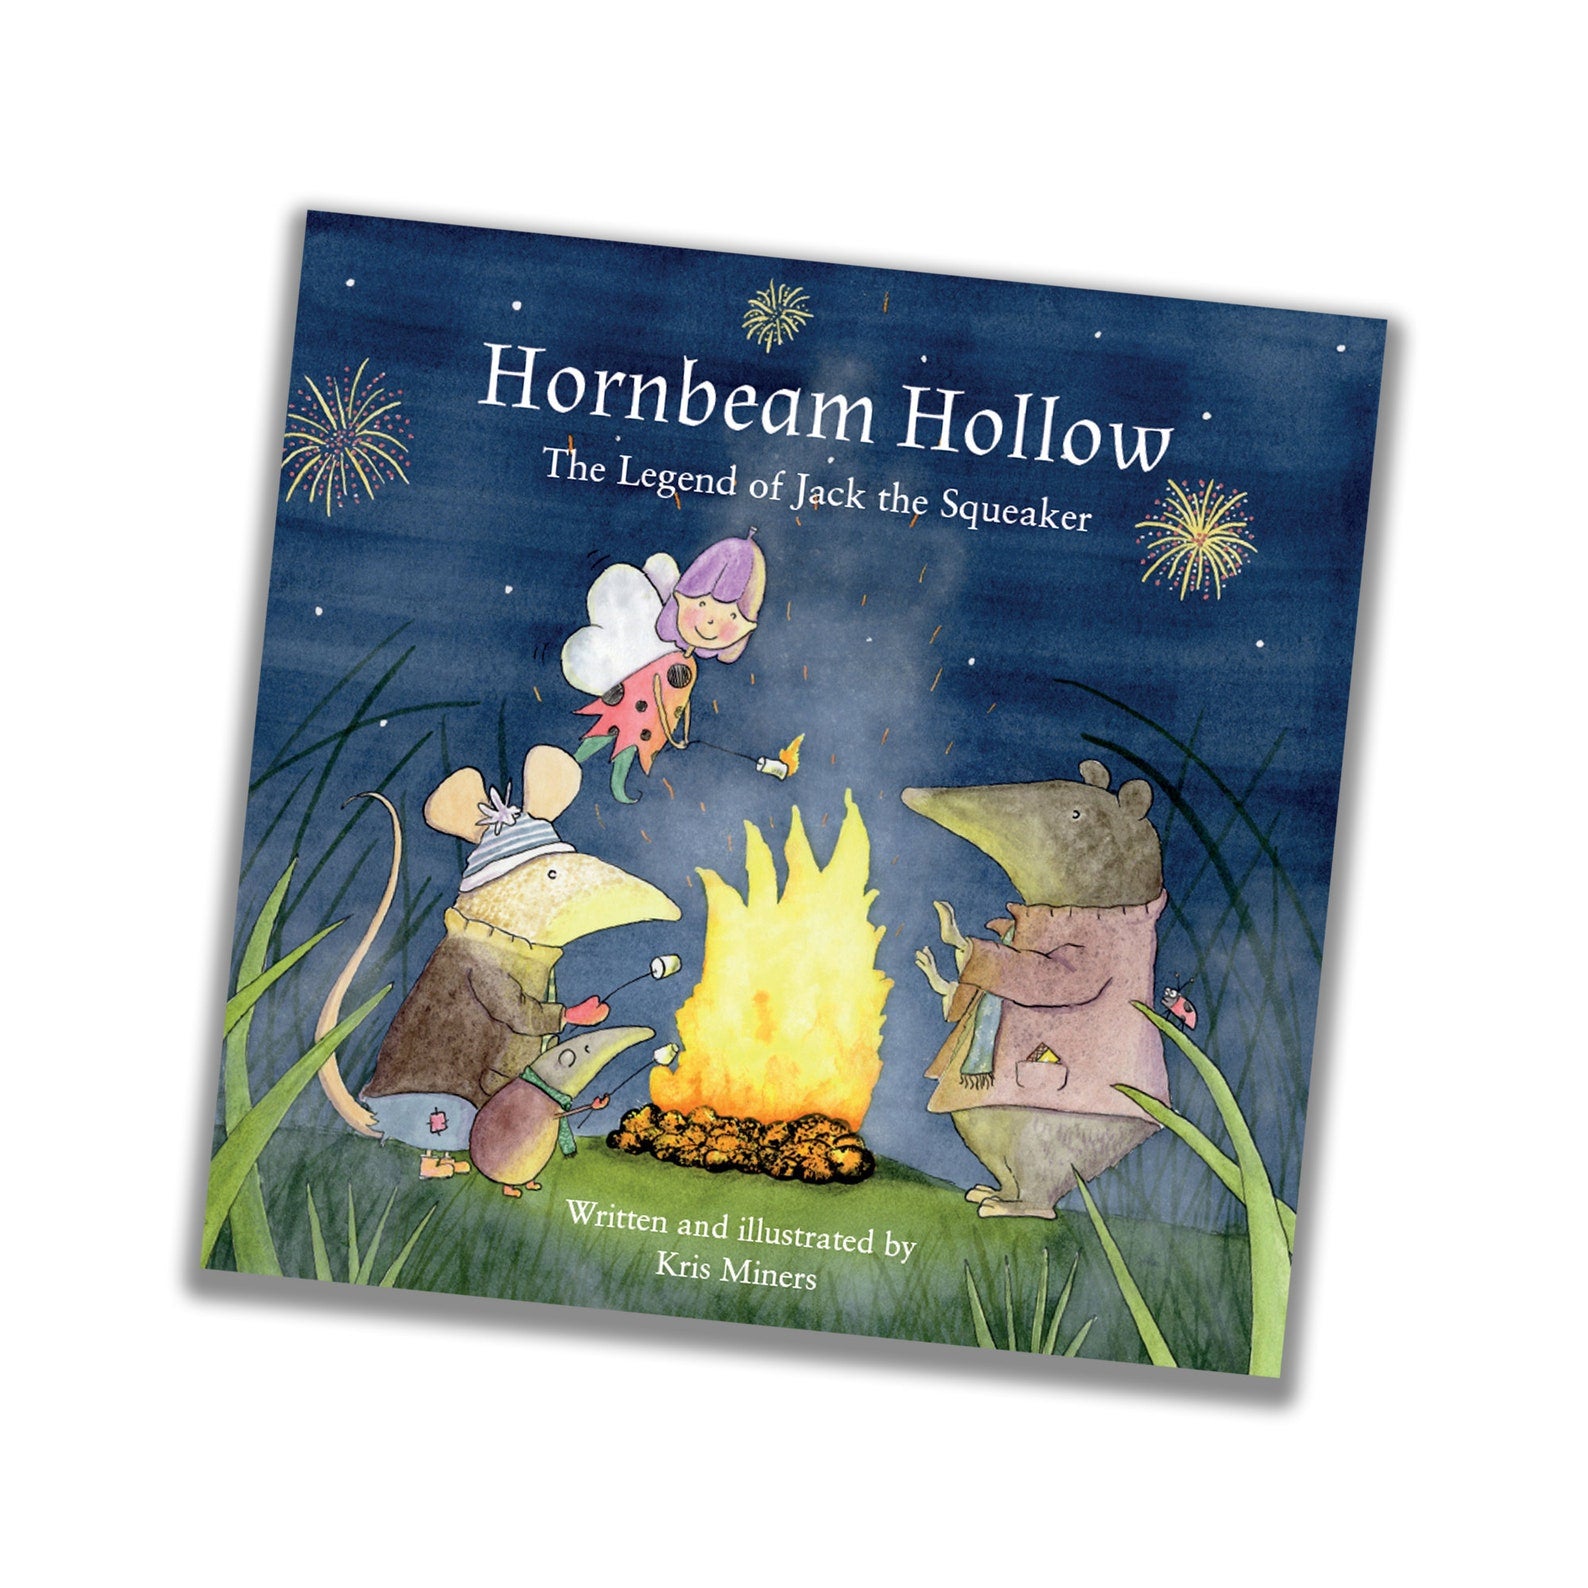 Hornbeam Hollow - The Legend Of Jack The Squeaker by Kris Miners